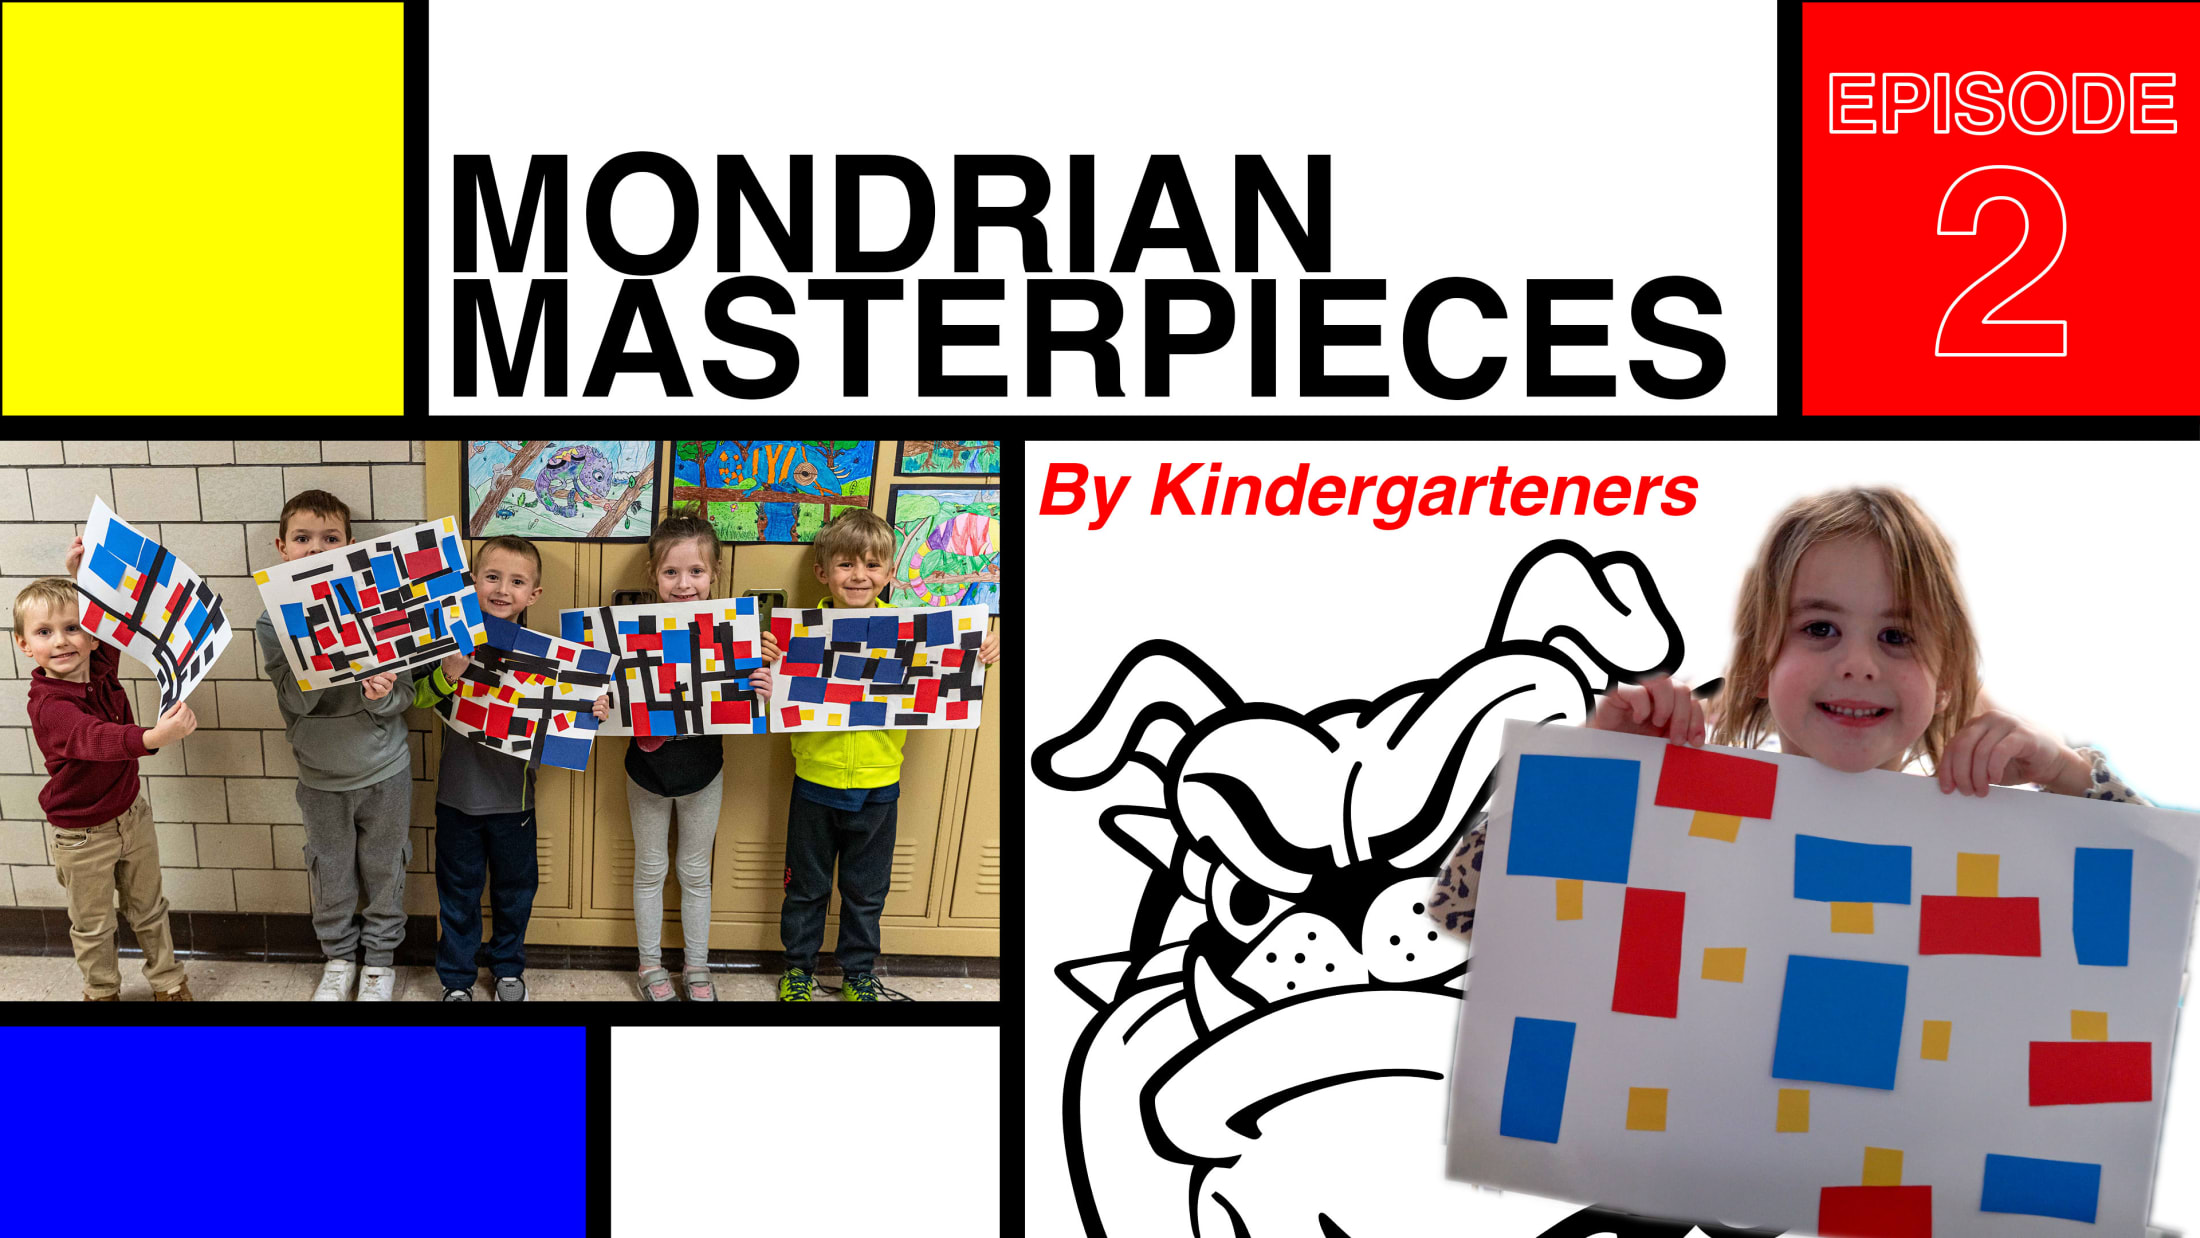 Mondrian Art Background, Students holding projects, Text Reads ...